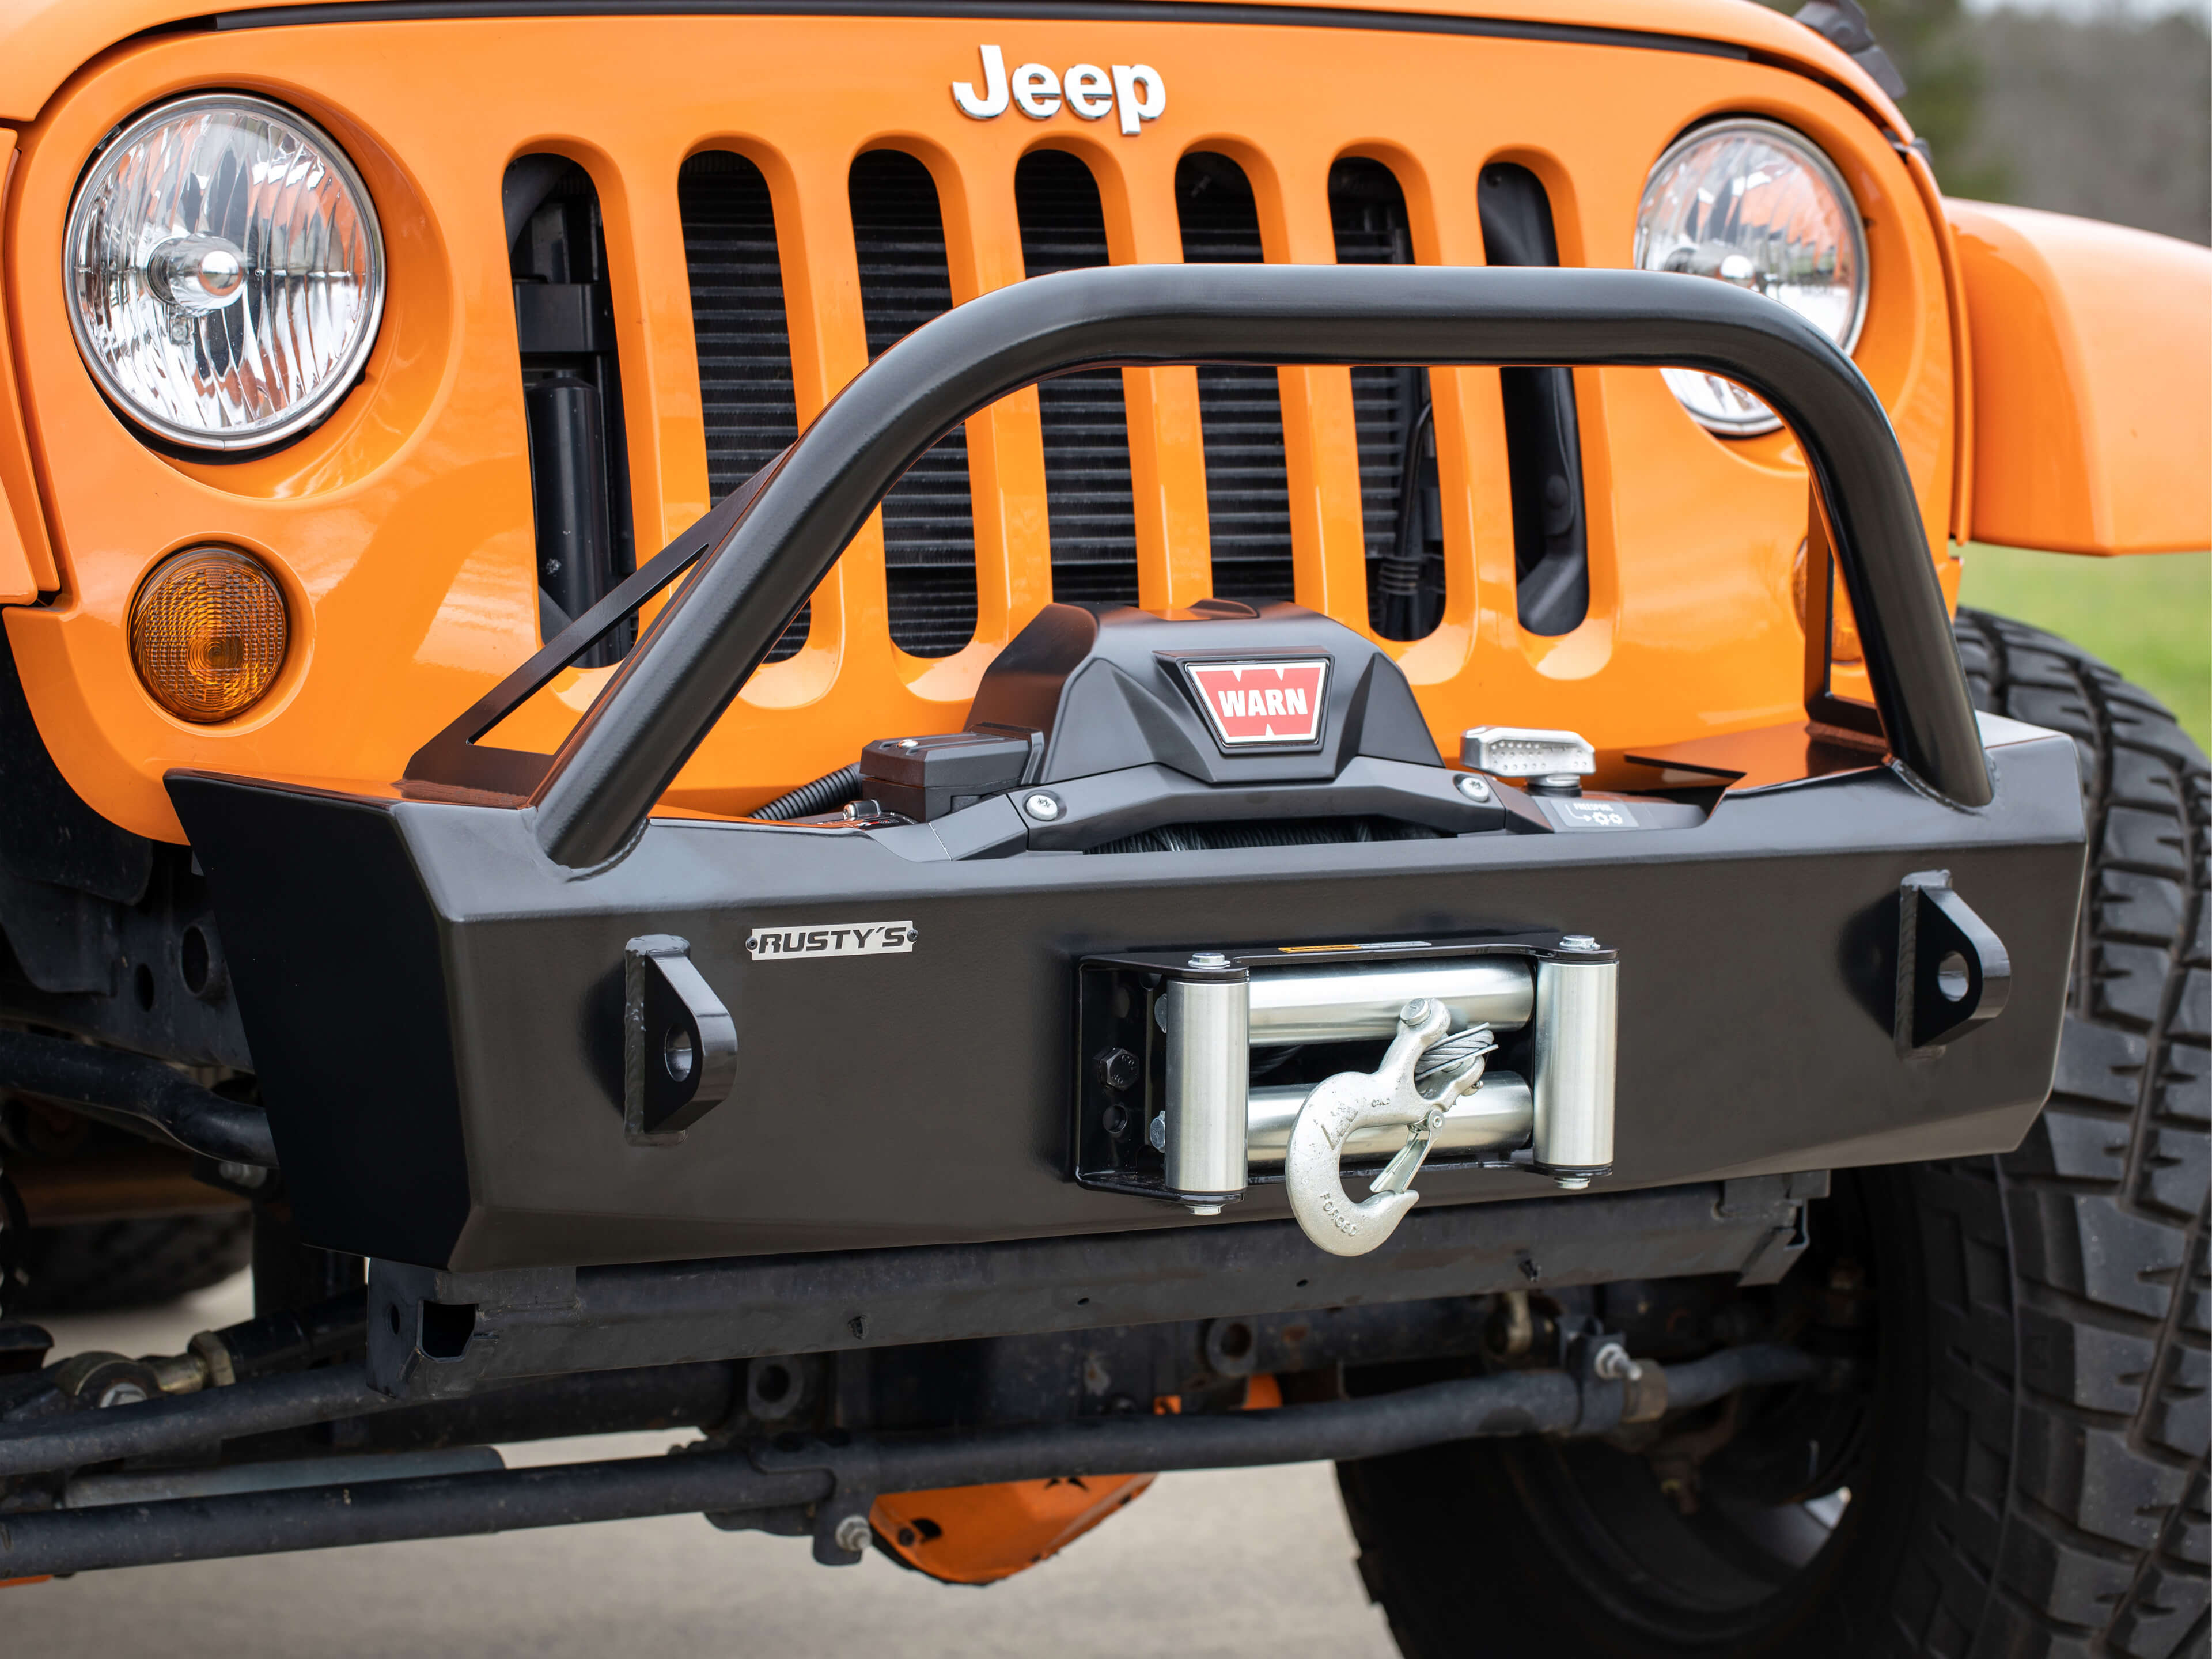 Rusty's JK Wrangler Stubby Front Trail Bumper – Rusty's Off-Road Products